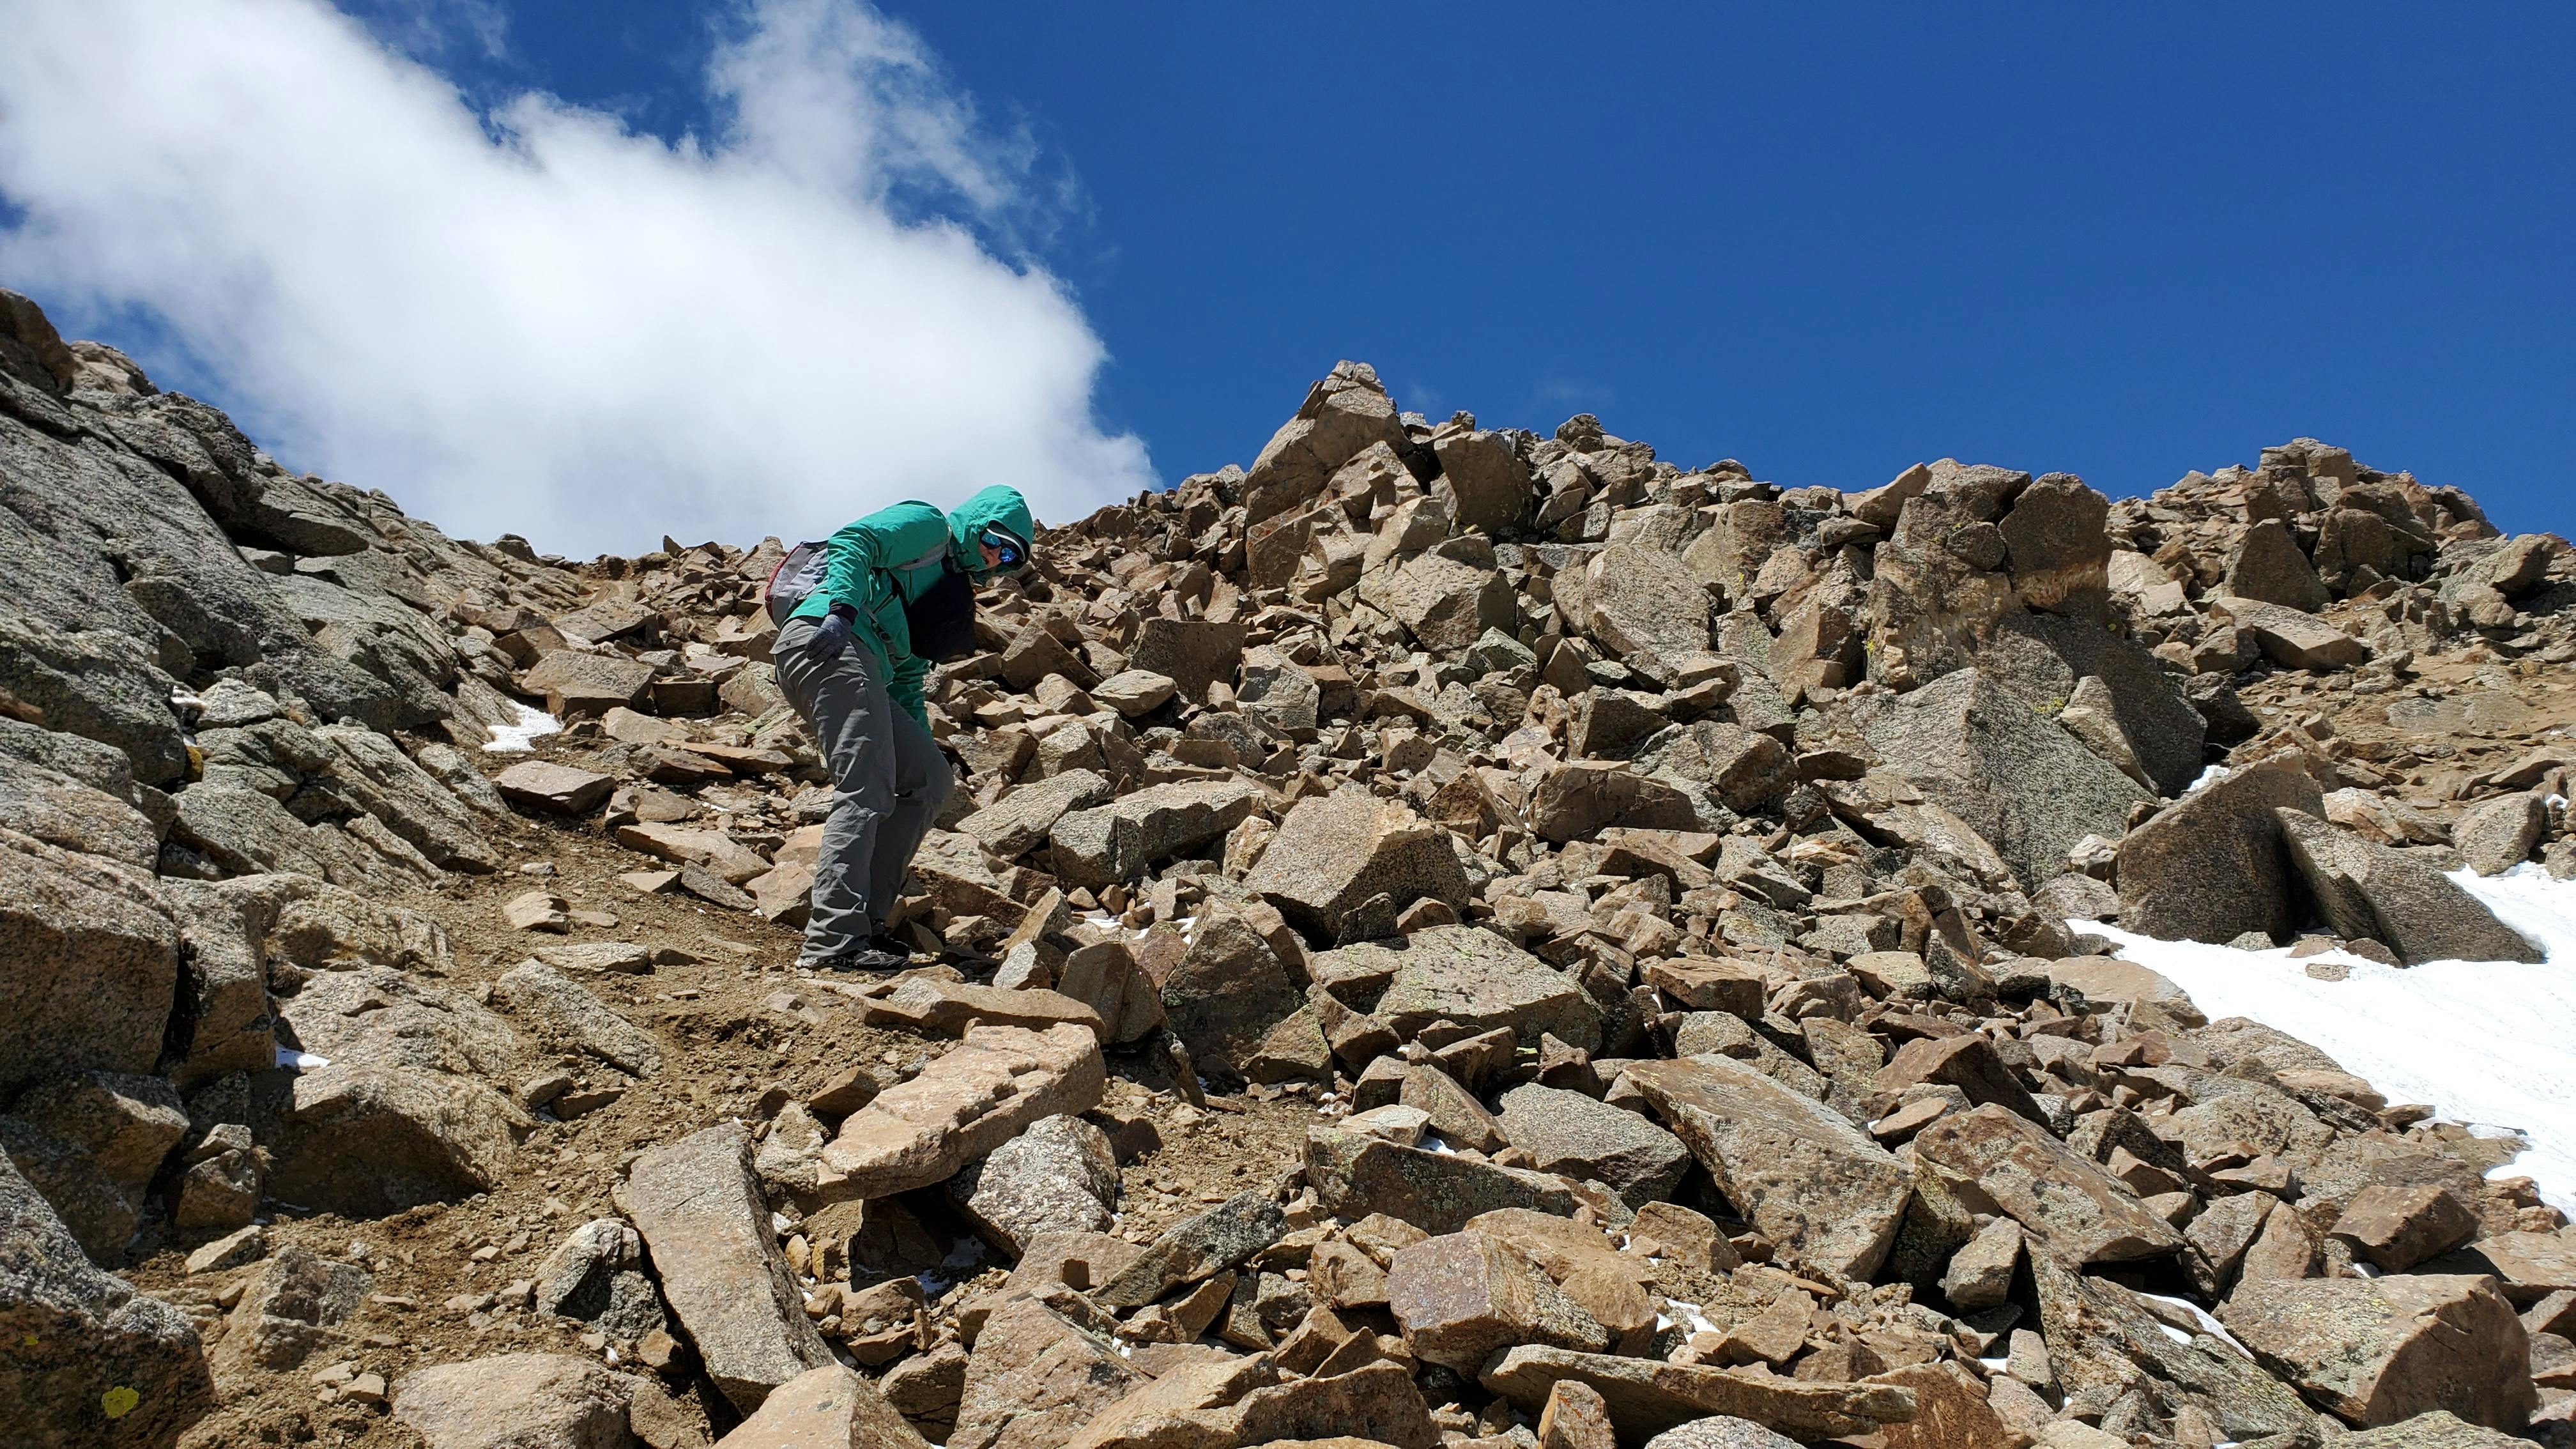 A hiker in a turquoise jacket and grey hiking pants descending from a rocky mountain summit